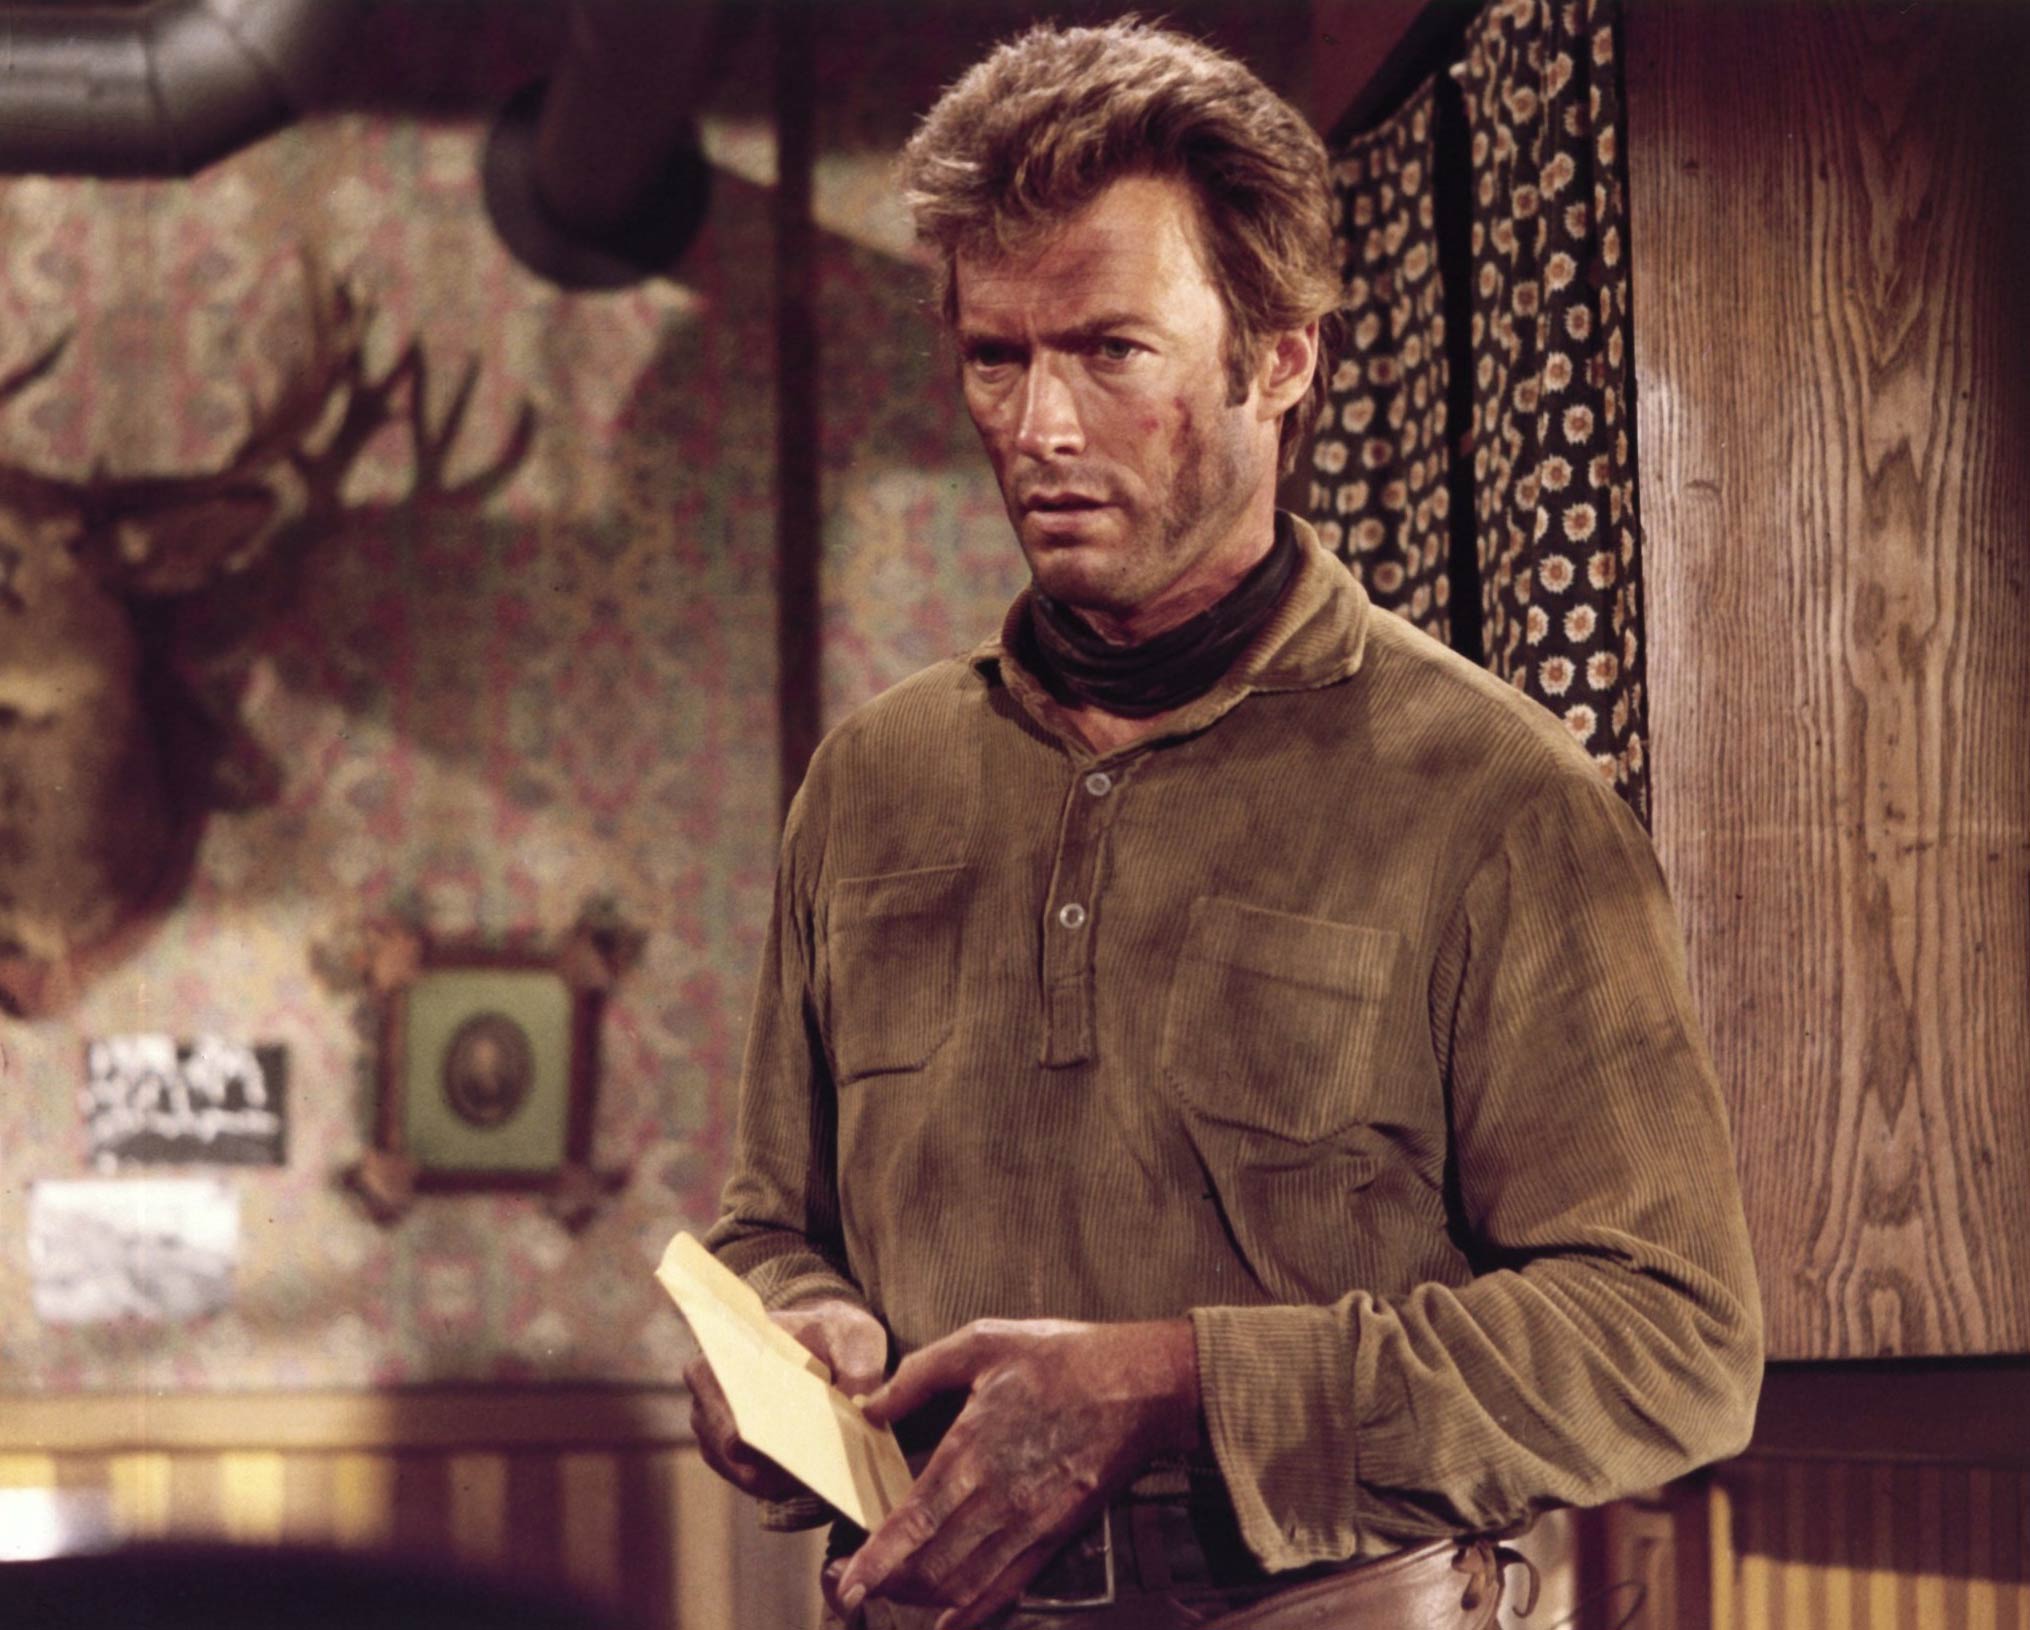 Hang 'Em High, 1968 Back in Hollywood, now as a star, Eastwood naturally made a Western that was less than the Leone films (no artistry here) but proved he was a solid moneymaker in homegrown oaters. He  plays a leathery loner out to clean up a dirty territory,  TIME's Stefan Kanfer wrote.  An unauthorized posse mistakes Eastwood for a murderer and decides that he is nooseworthy, but a kindly marshal helps him escape. Clint spends the rest of the picture ricocheting off some loquacious character actors, getting leaky with bullet holes, and running the lynch mob to earth. Along the way, the necrophilic camera lingers lovingly over the dead and dying. With some evocative photography and a touch of gallows humor, Director Ted Post tries to make Hang 'Em High stylish and spirited enough to swing. It swings all right—like a body at the end of a rope.